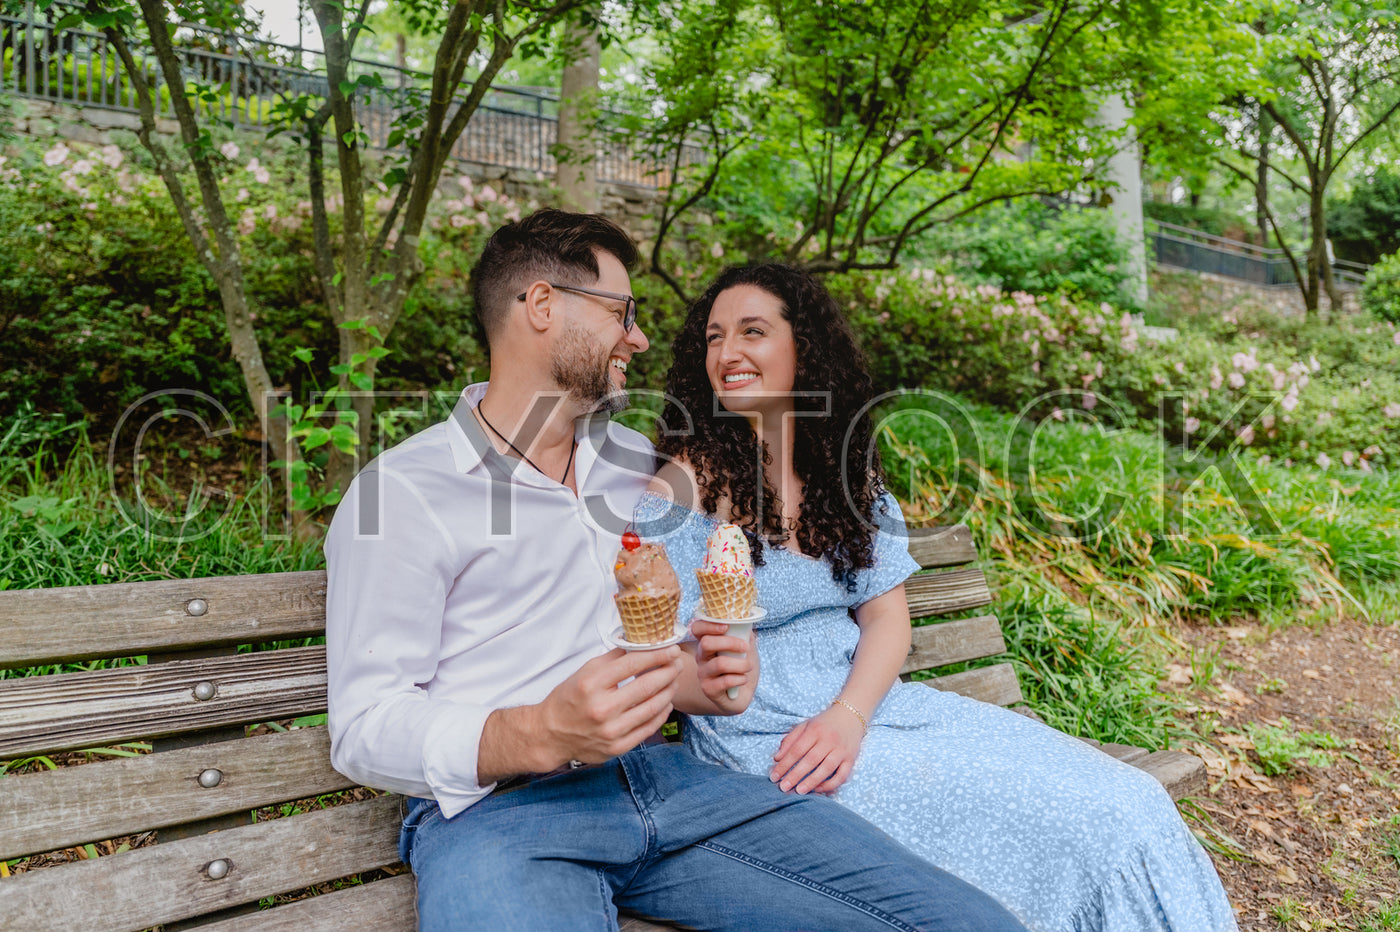 Couple laughing together with ice creams in Greenville park